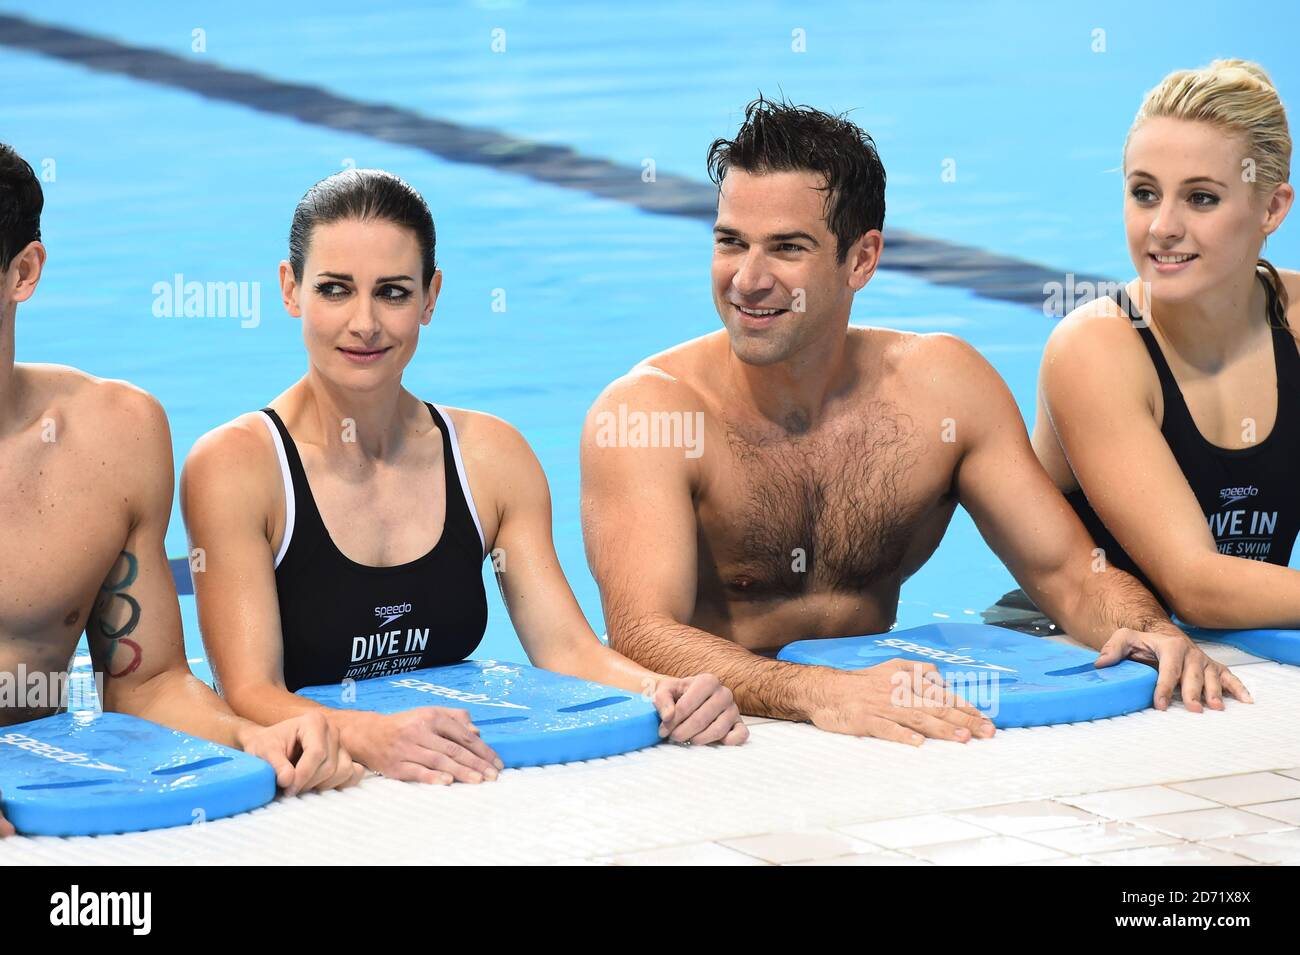 Kirsty Gallacher and Gethin Jones pictured at the launch of Speedo's 'Dive  In' campaign, at the Aquatic Centre in London's Olympic Park, Stratford.  The campaign is offering free swim sessions to help